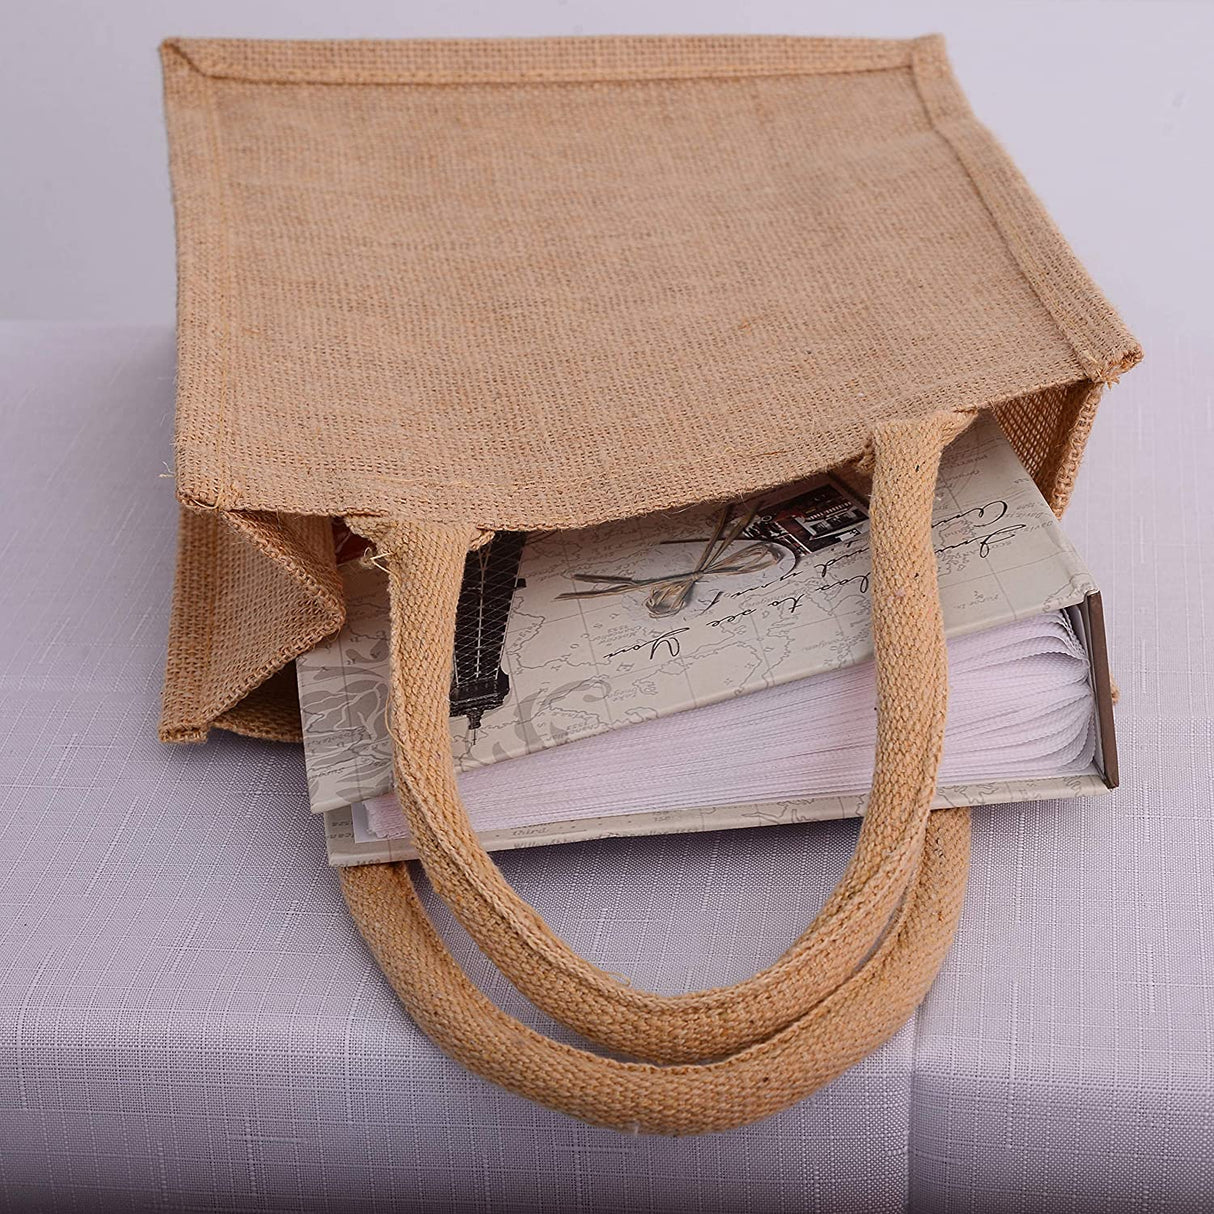 72 ct Small Burlap Bags / Jute Book Bag with Full Gusset - By Case